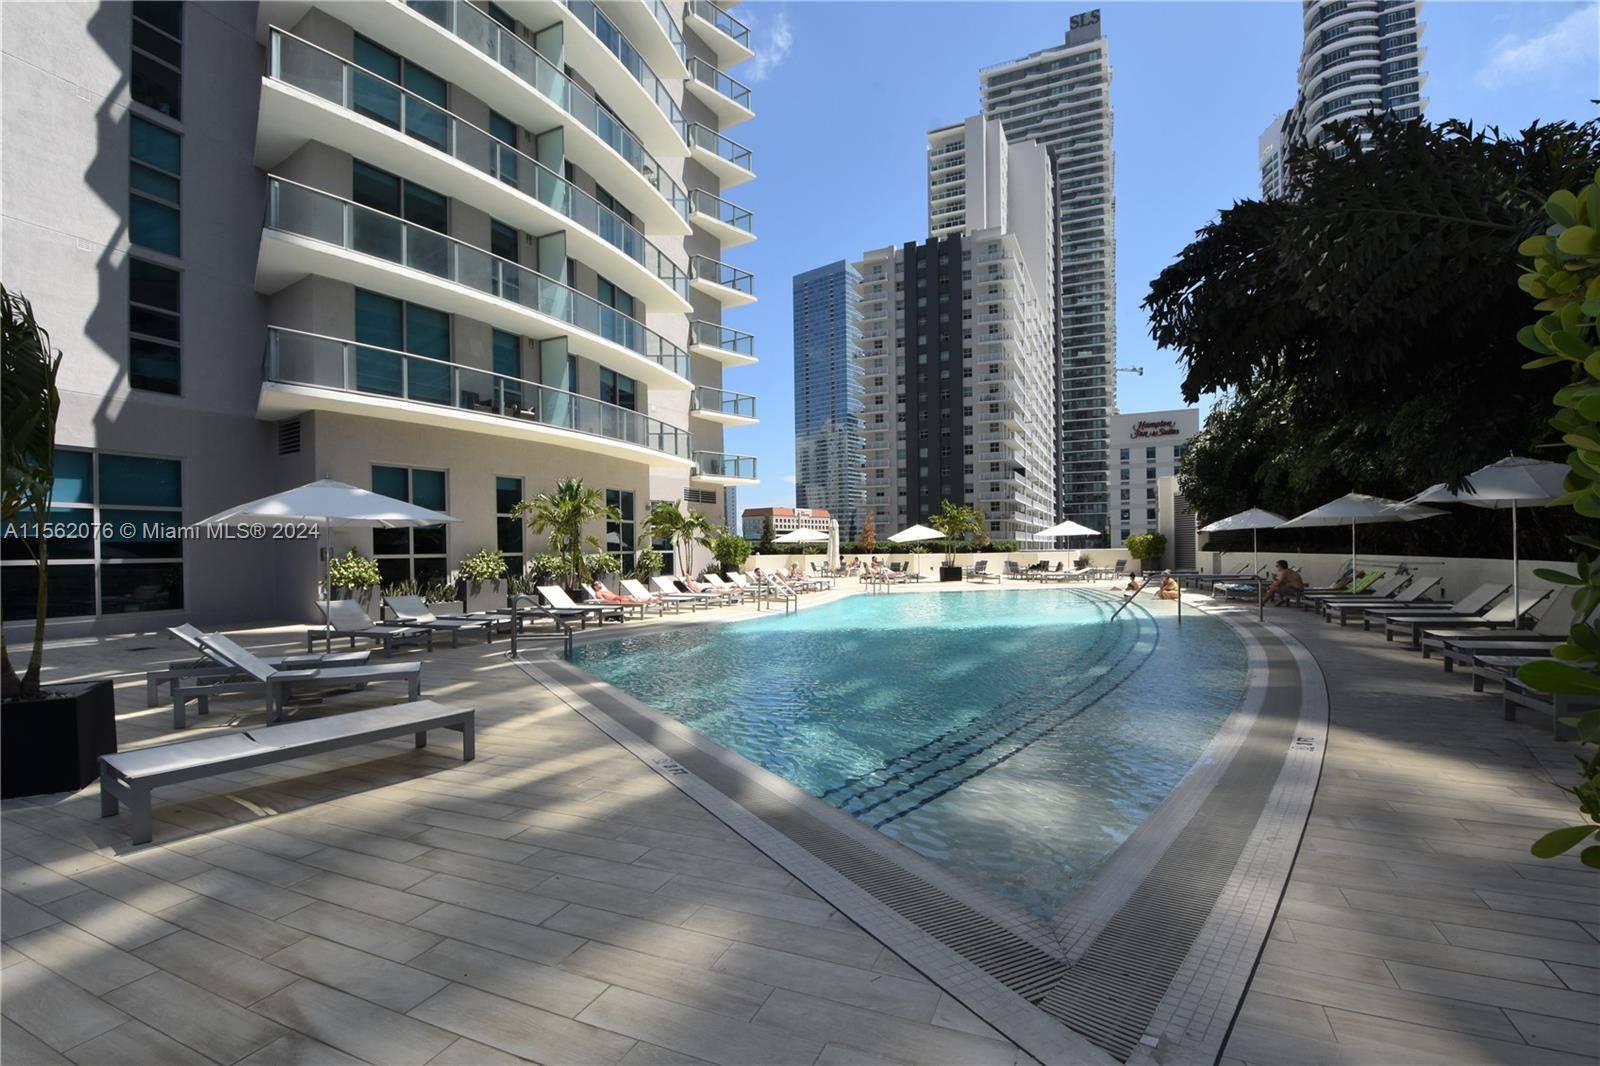 1 BED 1 BATH 1 DEN. Beautiful unit at Millecento, a piece of Art in Brickell.